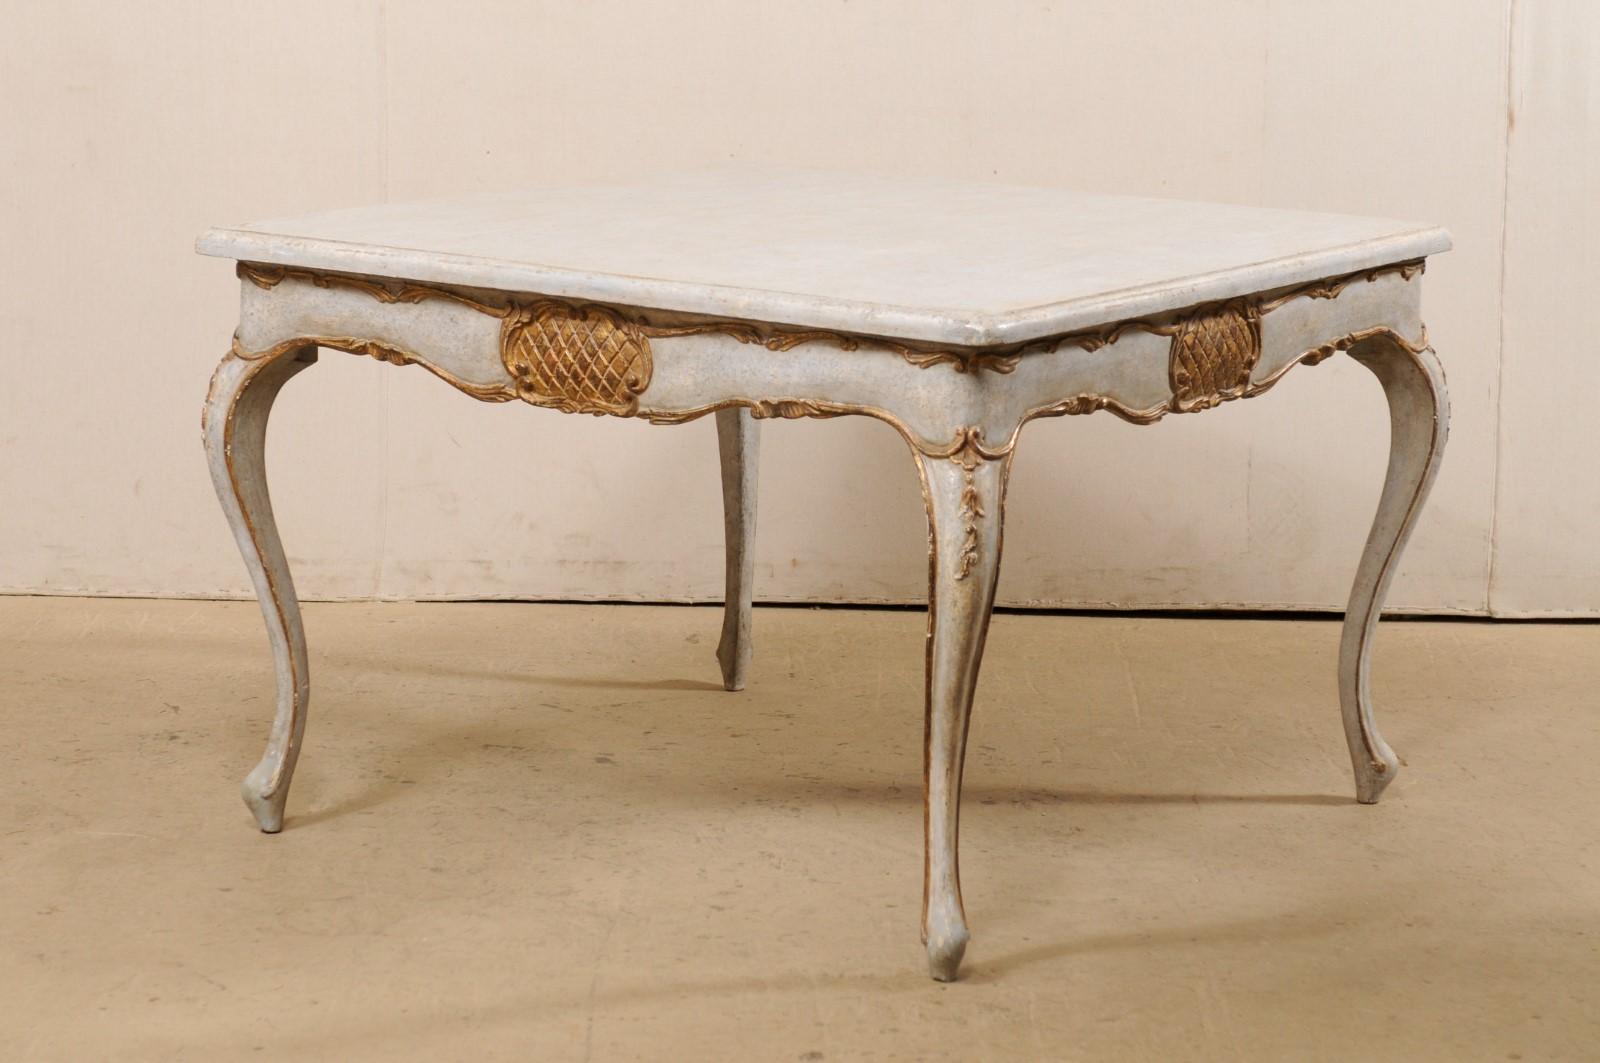 Italian Square-Shaped Wood Table w/ Elegant Legs, Scalloped Skirt & Gilt Accents For Sale 2